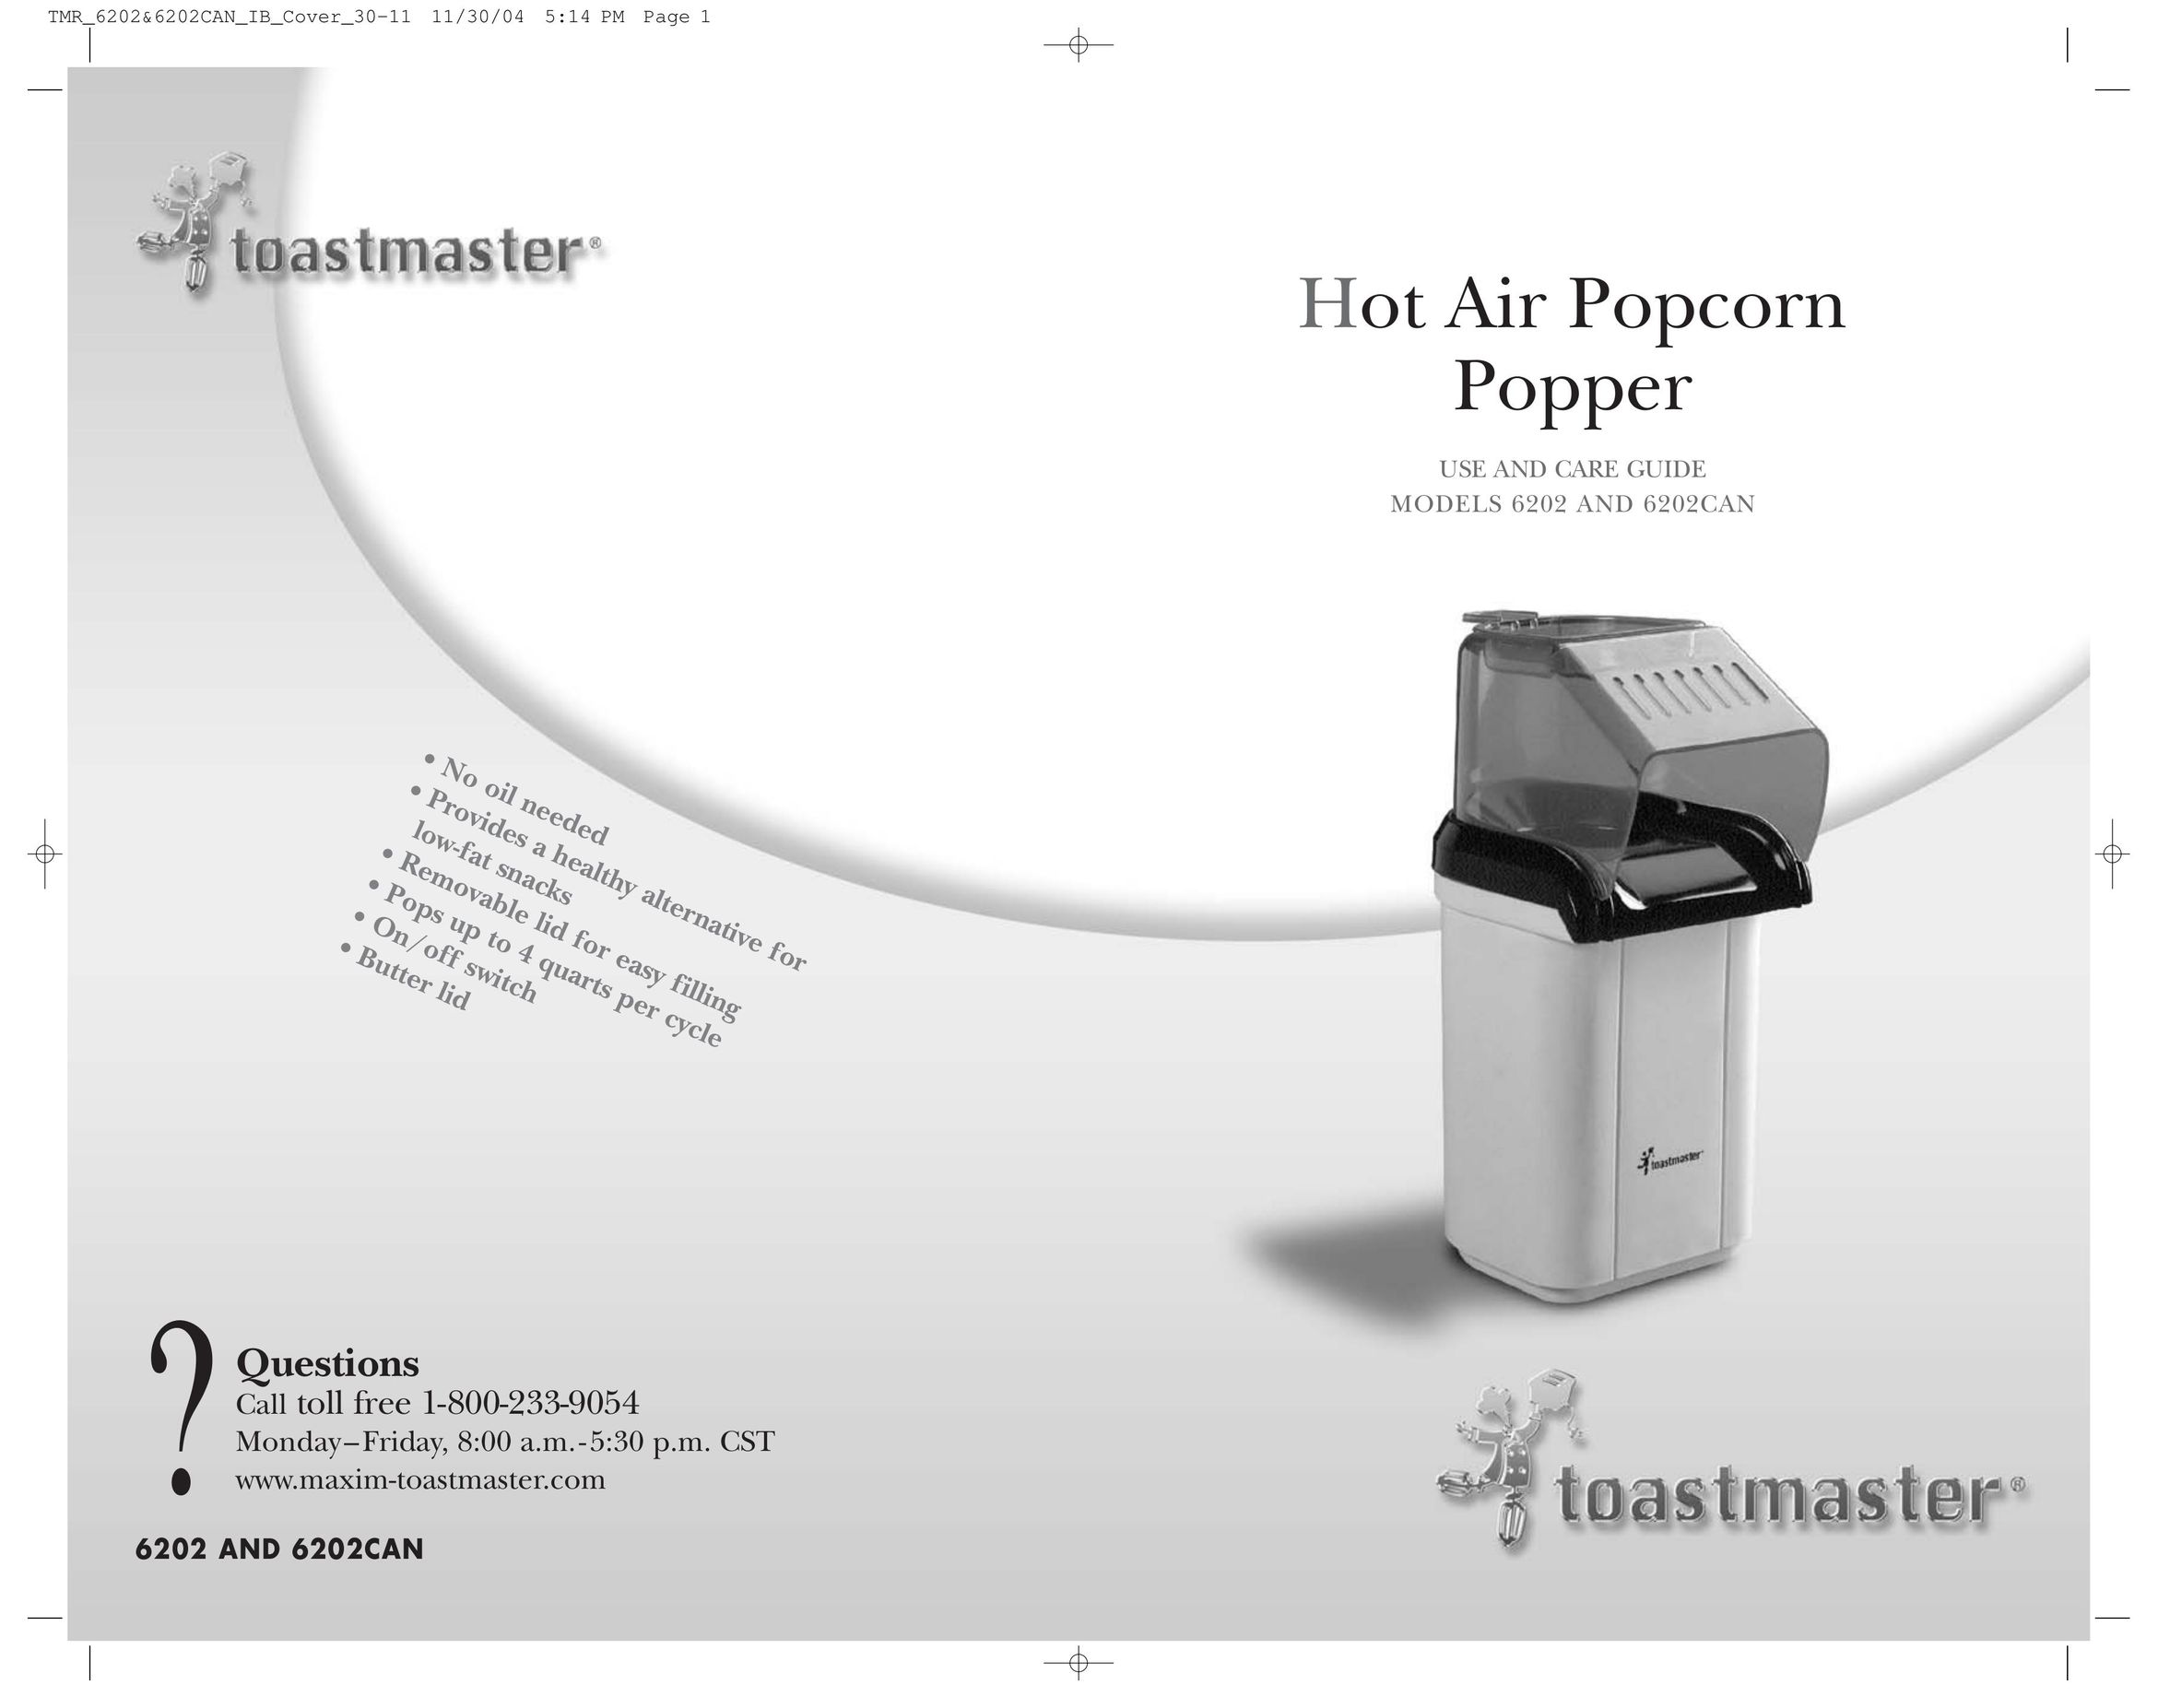 Toastmaster 6202CAN Popcorn Poppers User Manual